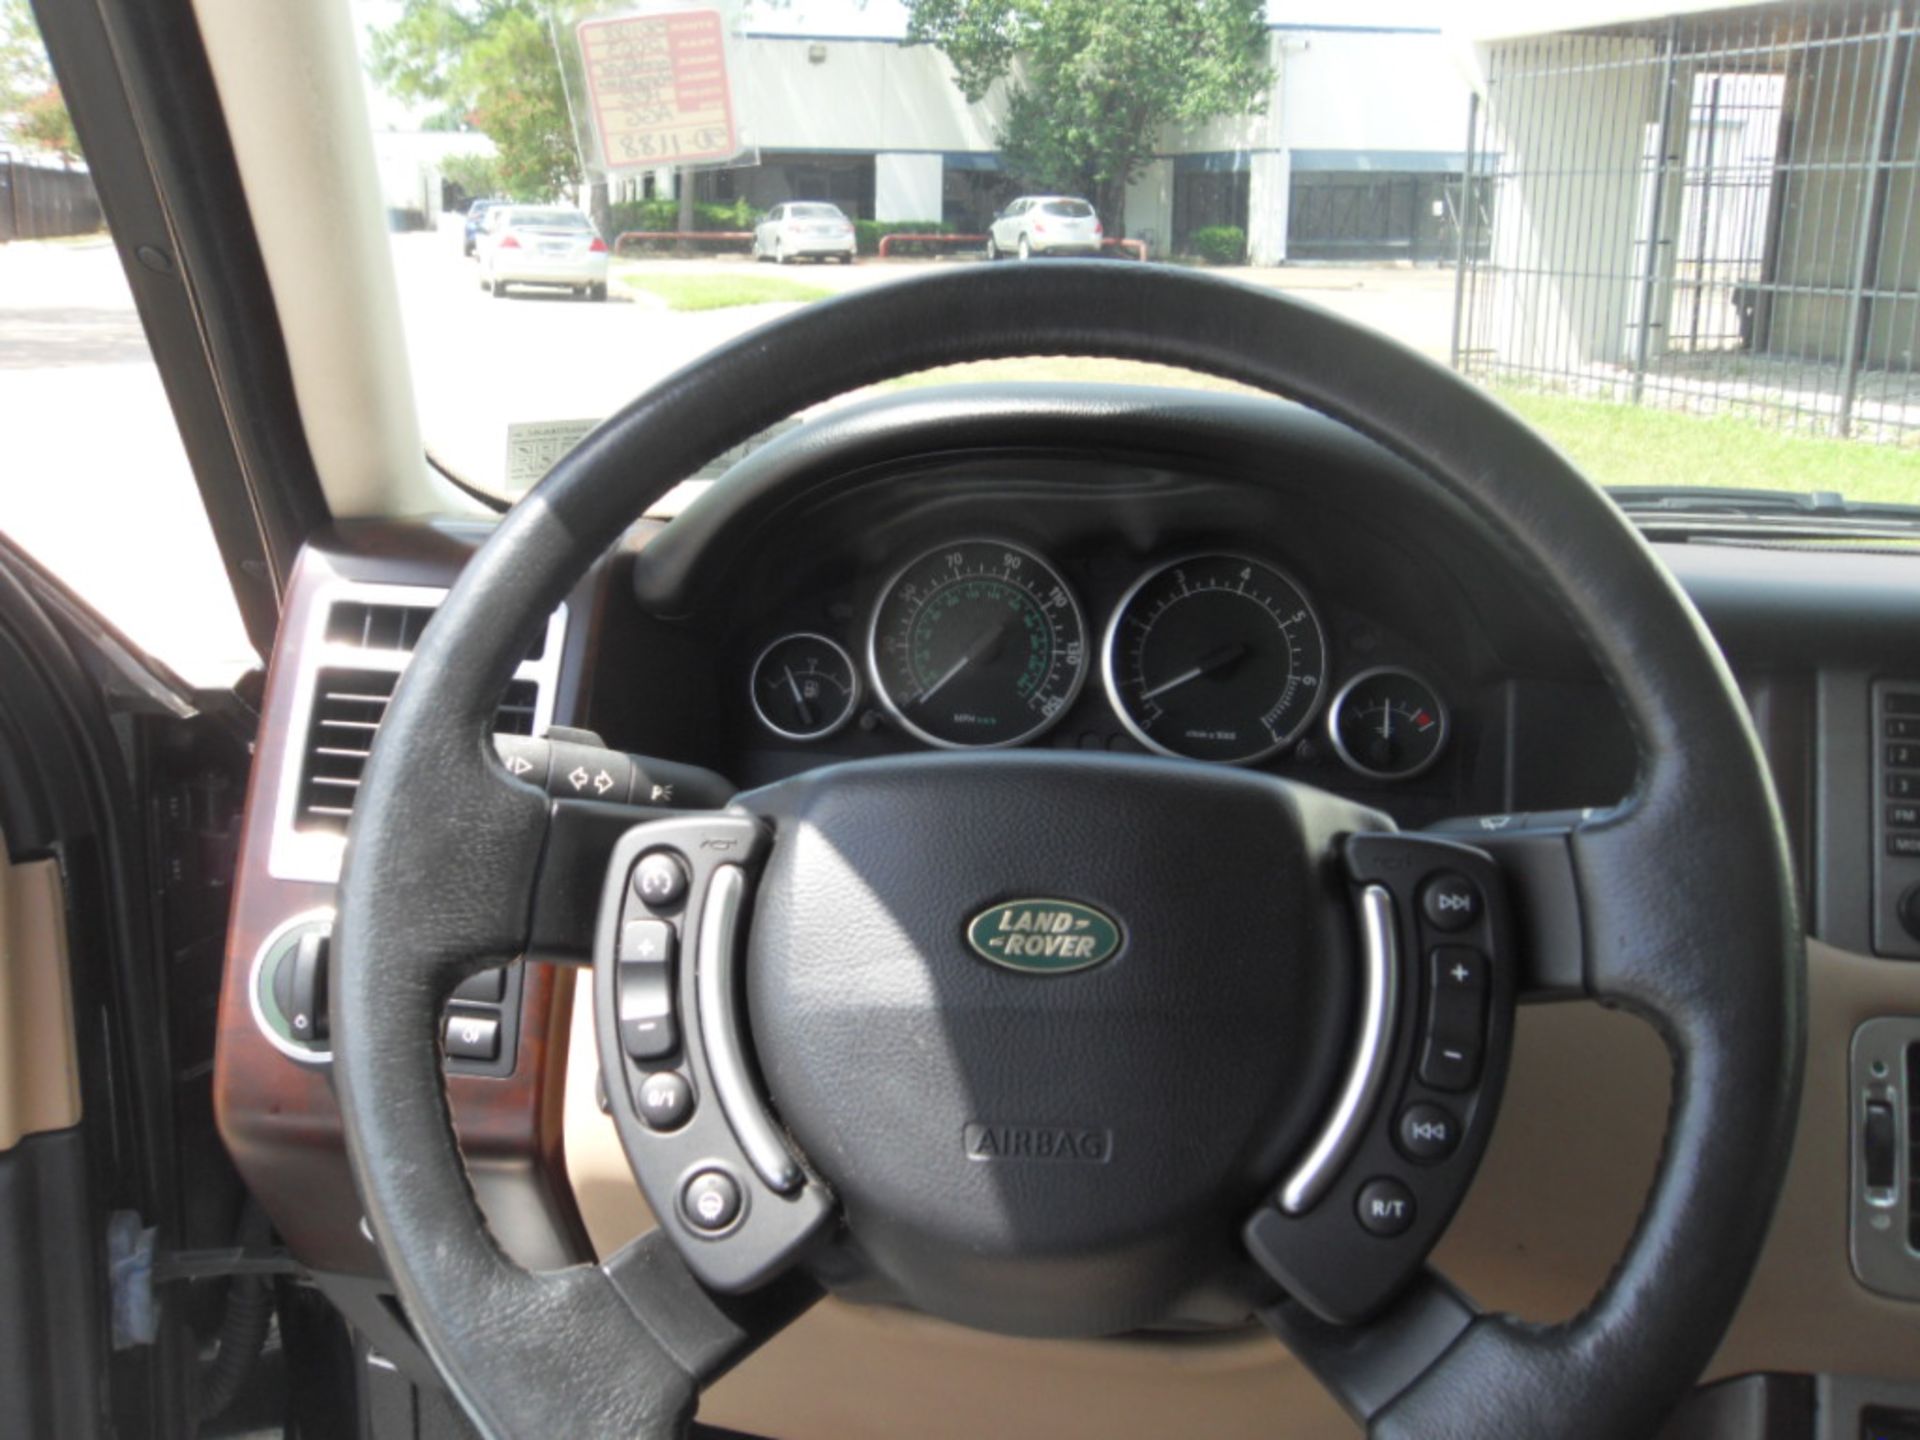 2003 Land Rover Range Rover HSE - Image 11 of 19